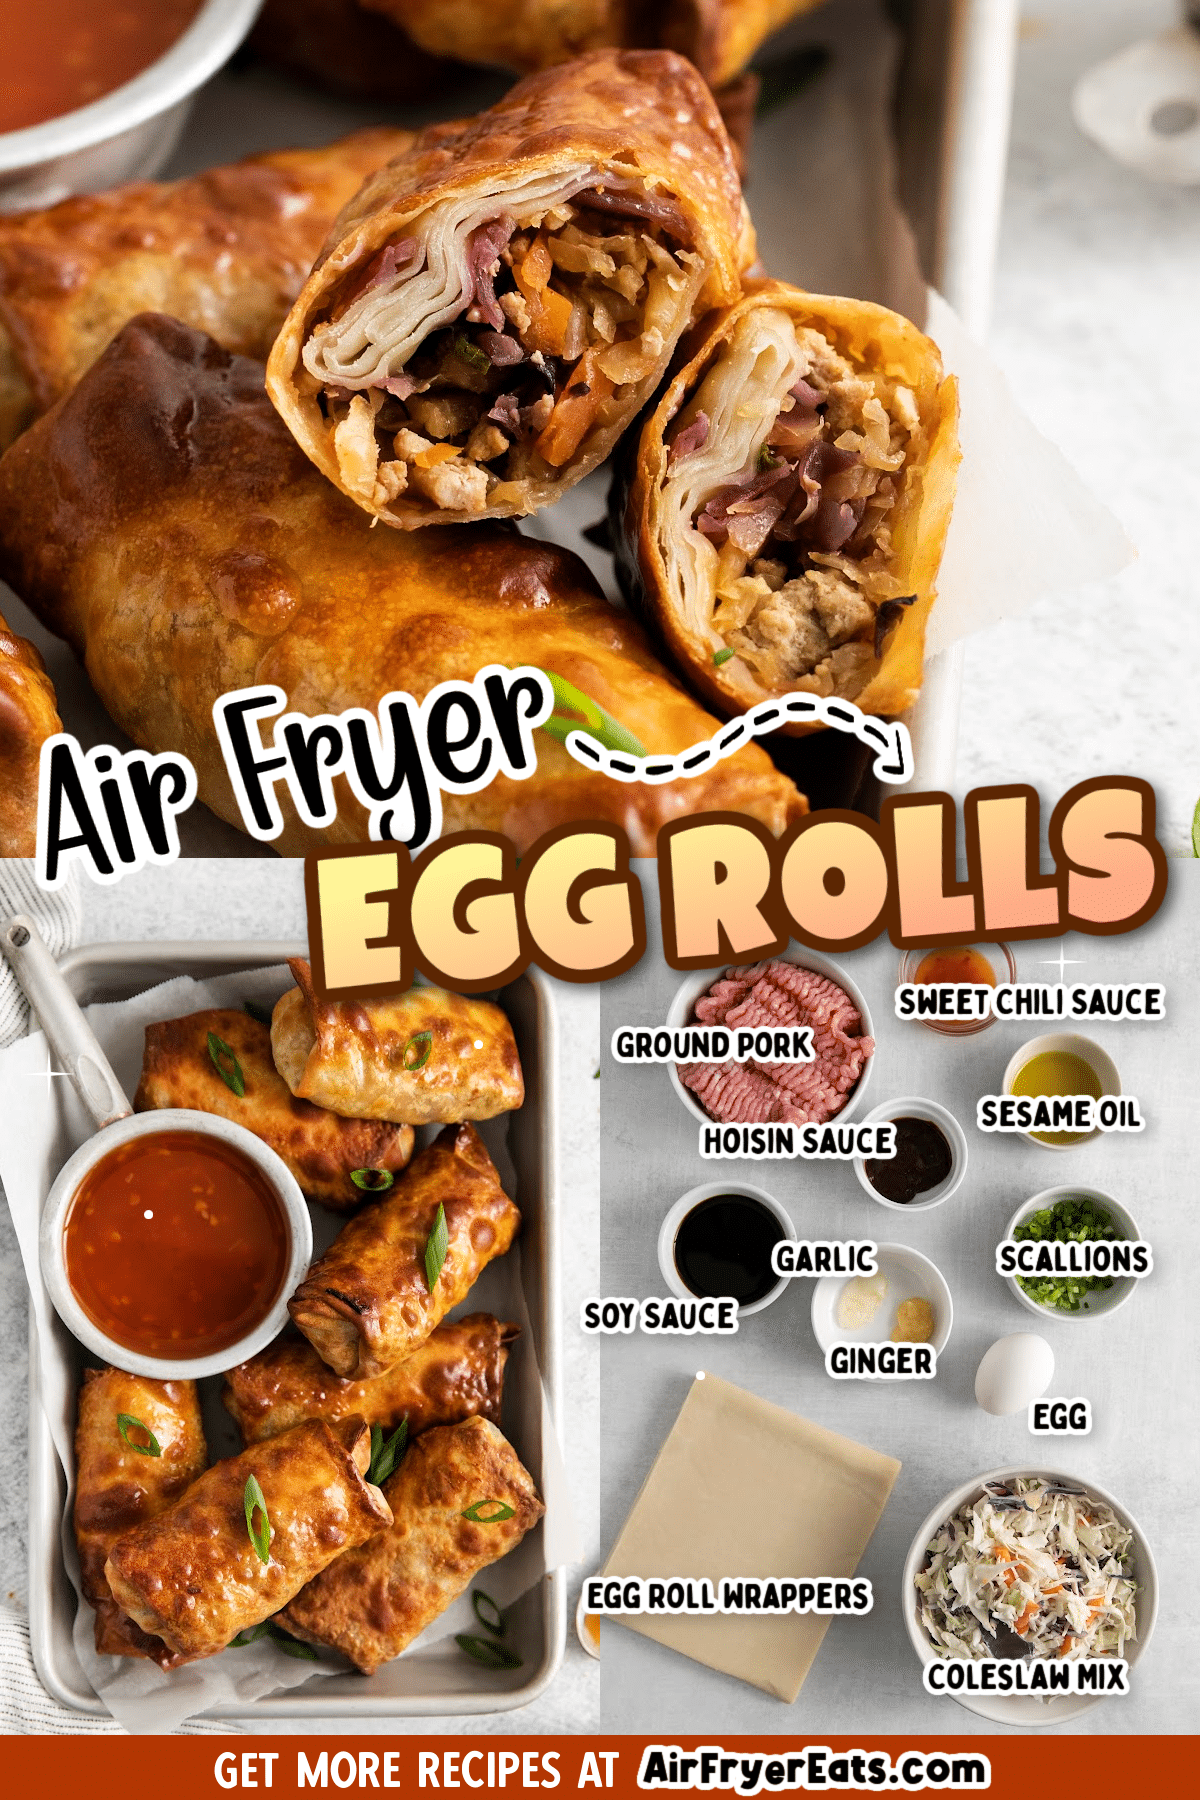 Air Fryer Eggs Rolls are a delicious and easy way to make this takeout favorite. These egg rolls are crispy on the outside and filled with a traditional pork and cabbage filling. Plus, they are cooked with a deep fryer, making them a healthier option. via @vegetarianmamma